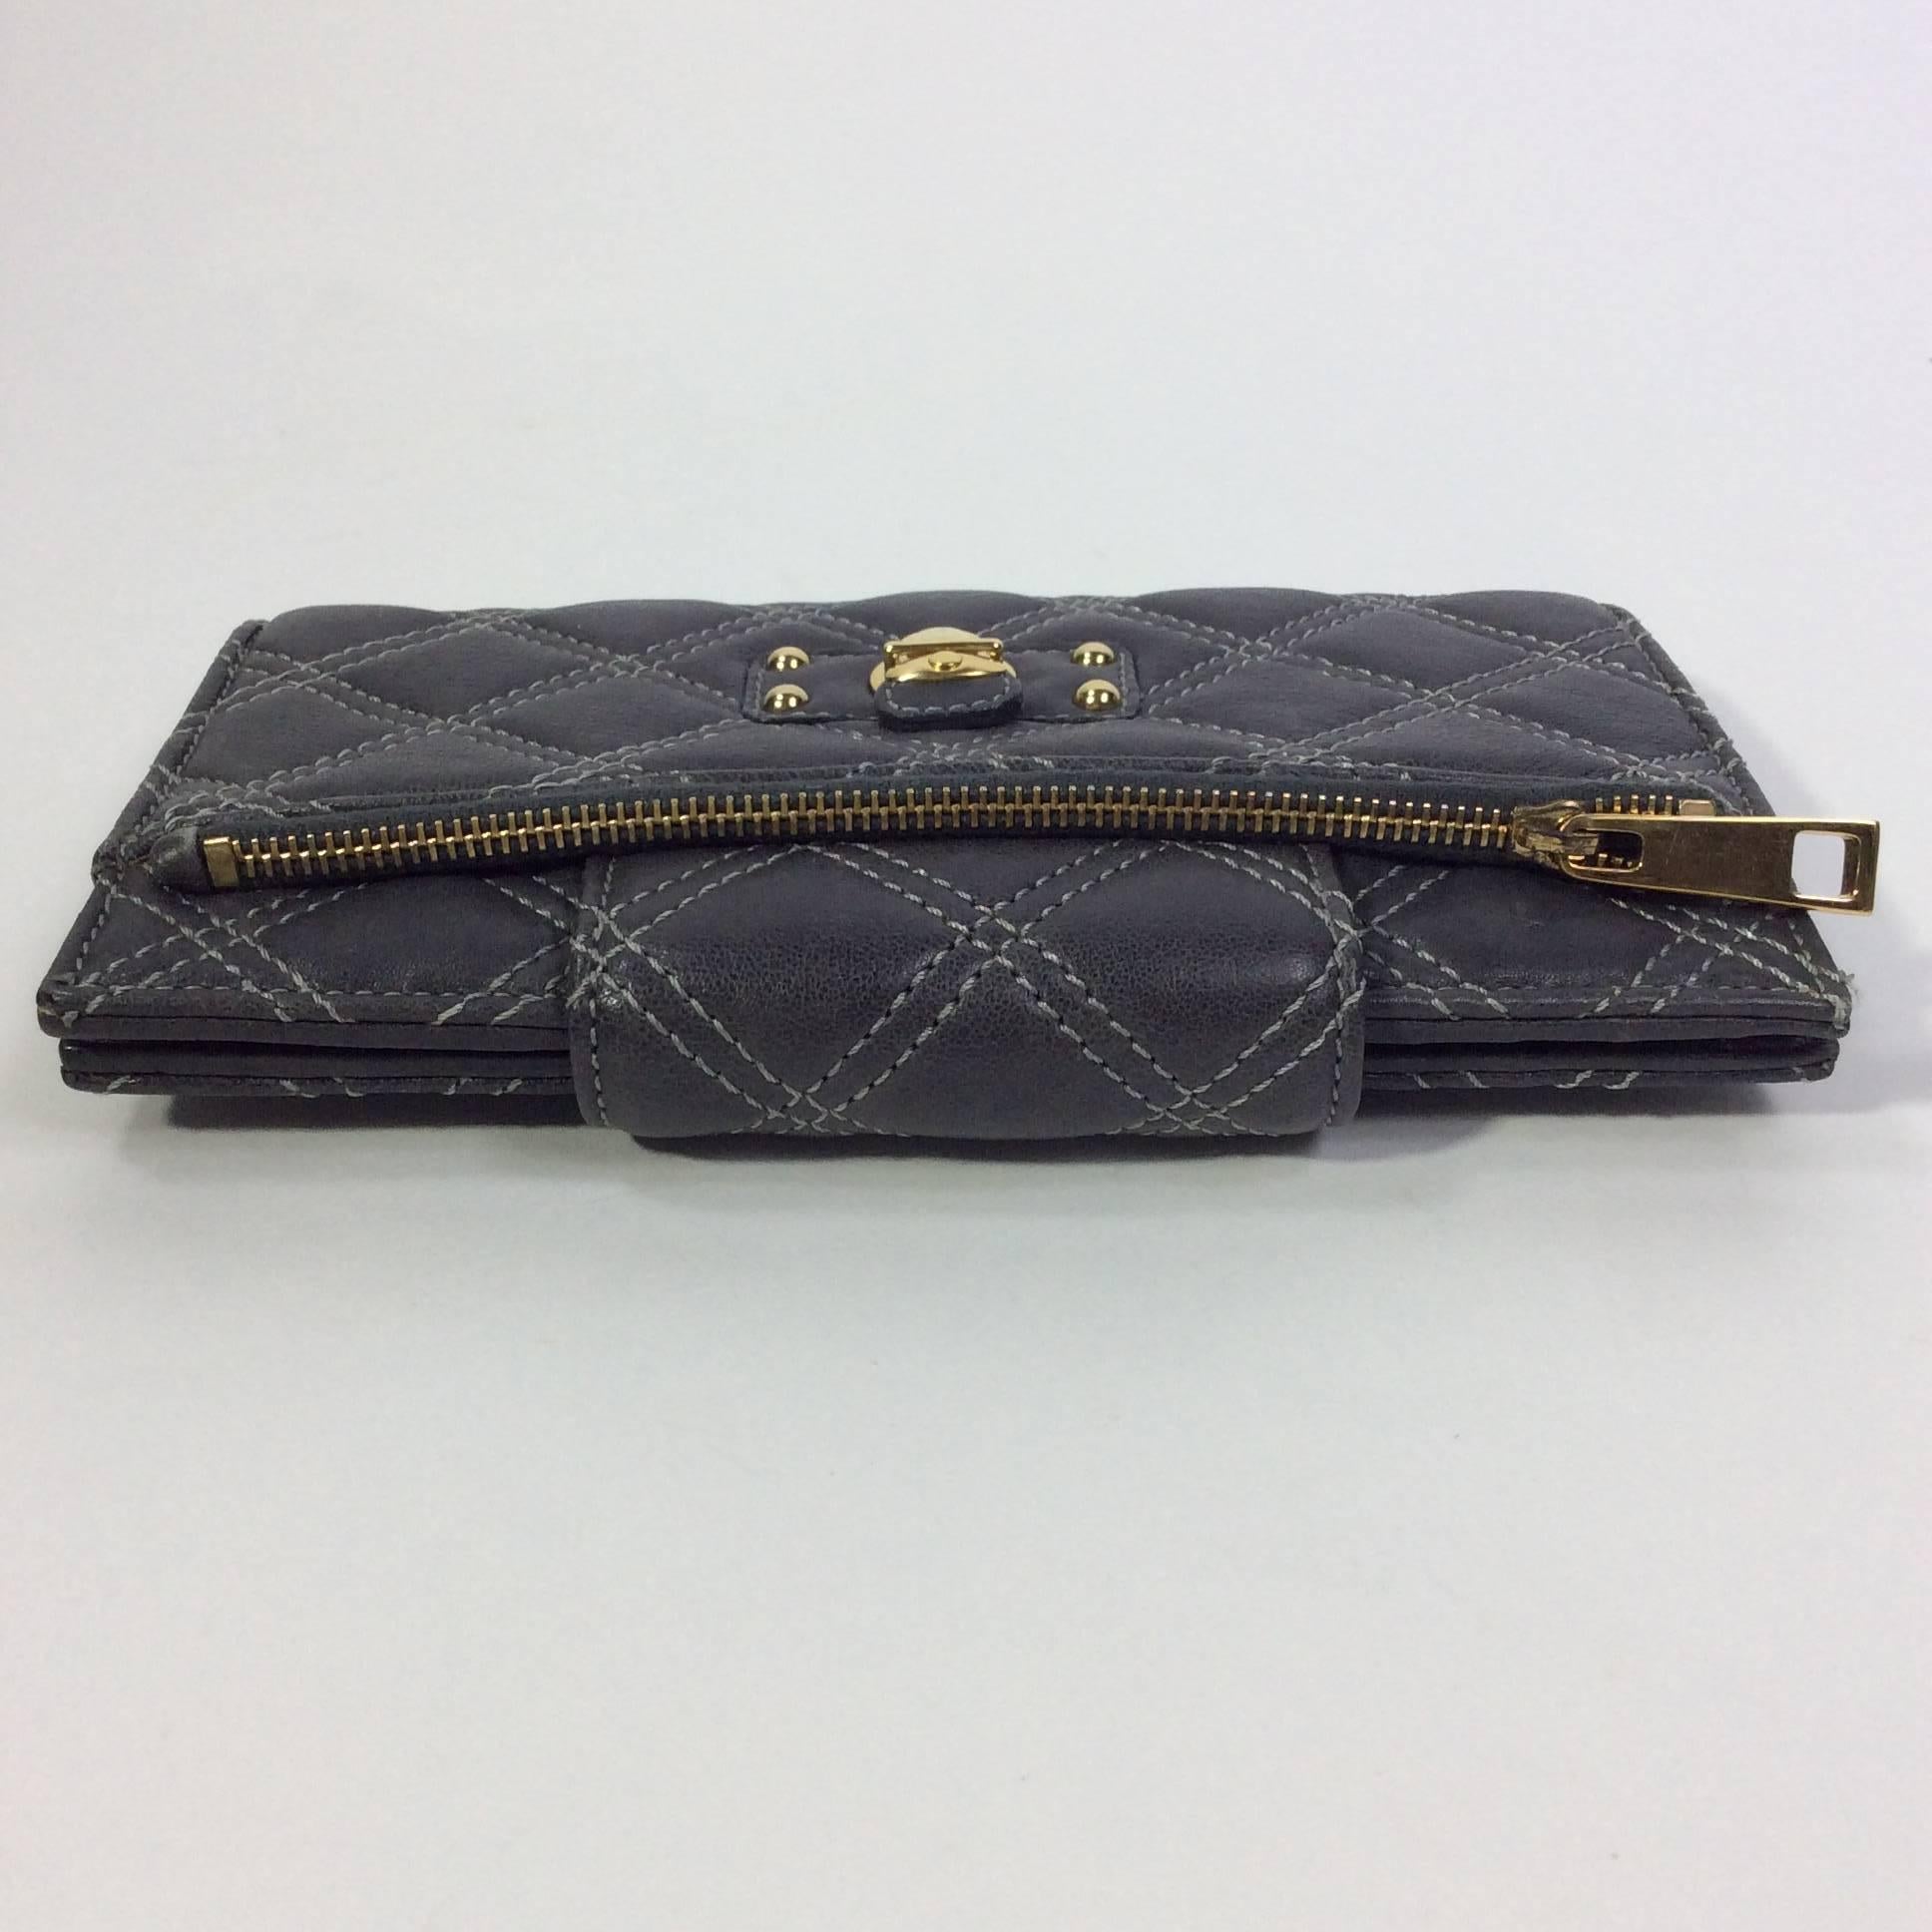 Grey Quilted Leather Wallet
4.5 inches tall, 7.5 inches wide, and 0.75 inches deep
Includes front zipper pocket and decorative gold clasp
Back pocket snaps shut
14 available card slots with one windowed slot
Grey leather with light grey